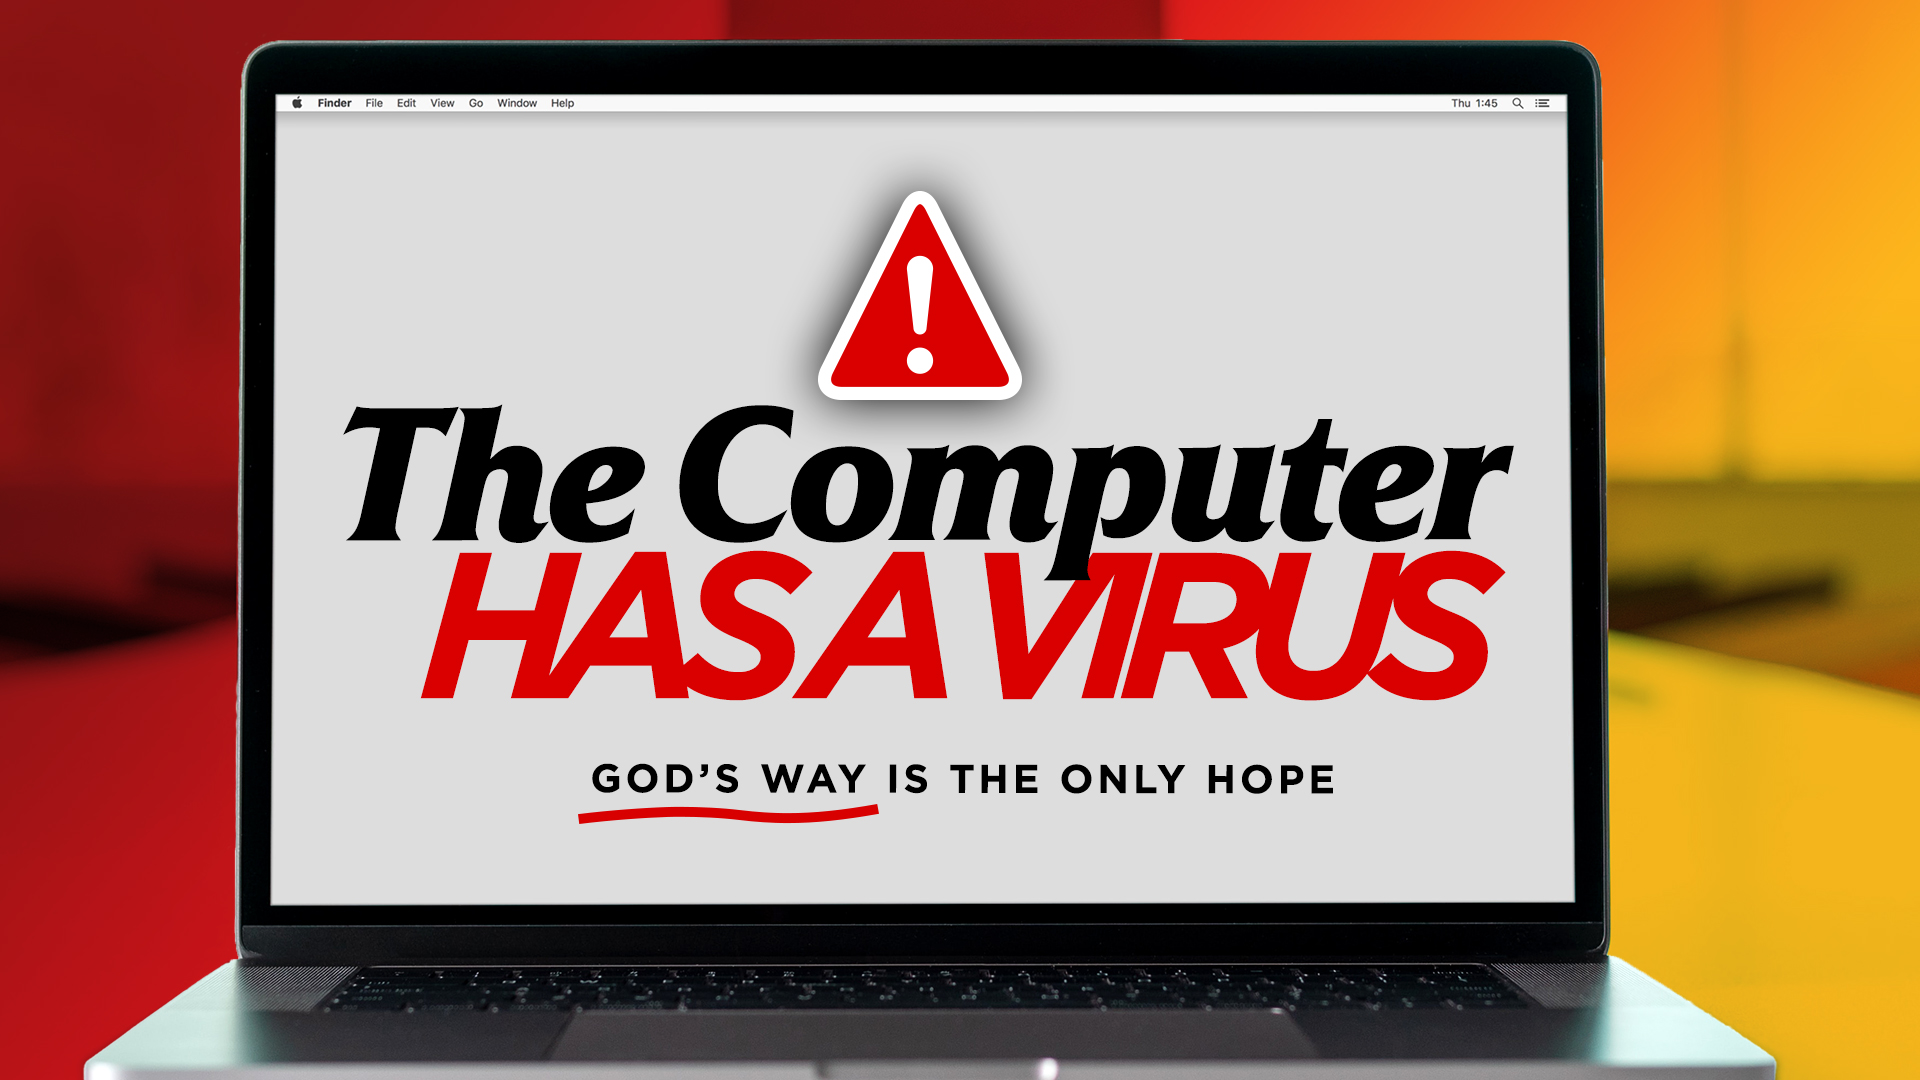 The Computer Has a Virus – God’s Way is the Only Hope